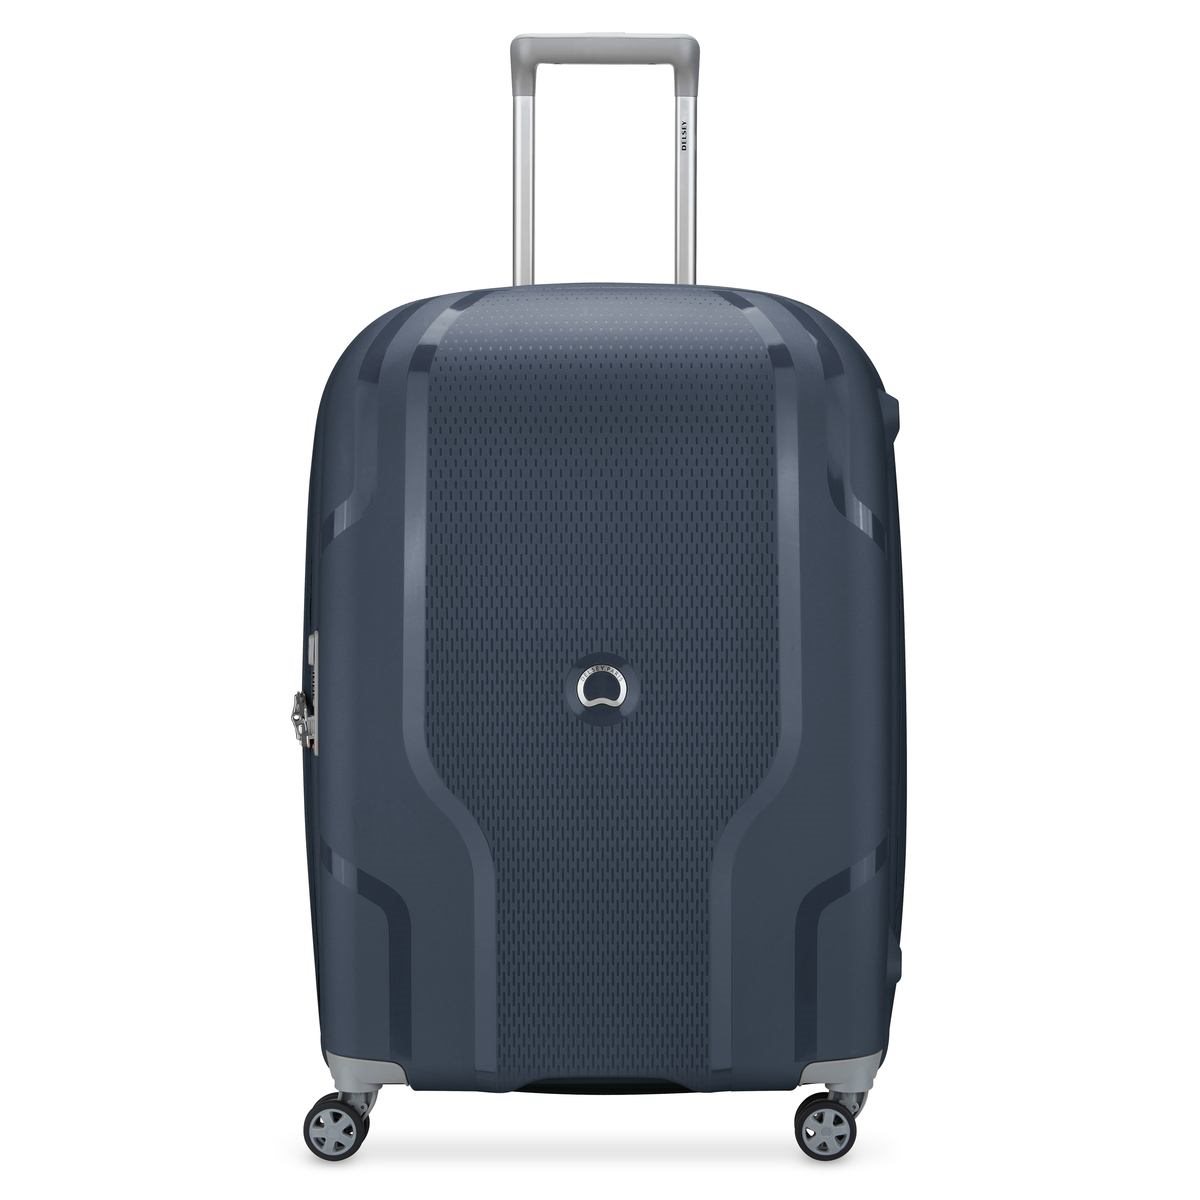 Delsey Βαλίτσα trolley μεσαία expandable 70,5x47x28,5/30.5cm σειρά Clavel Blue Jean